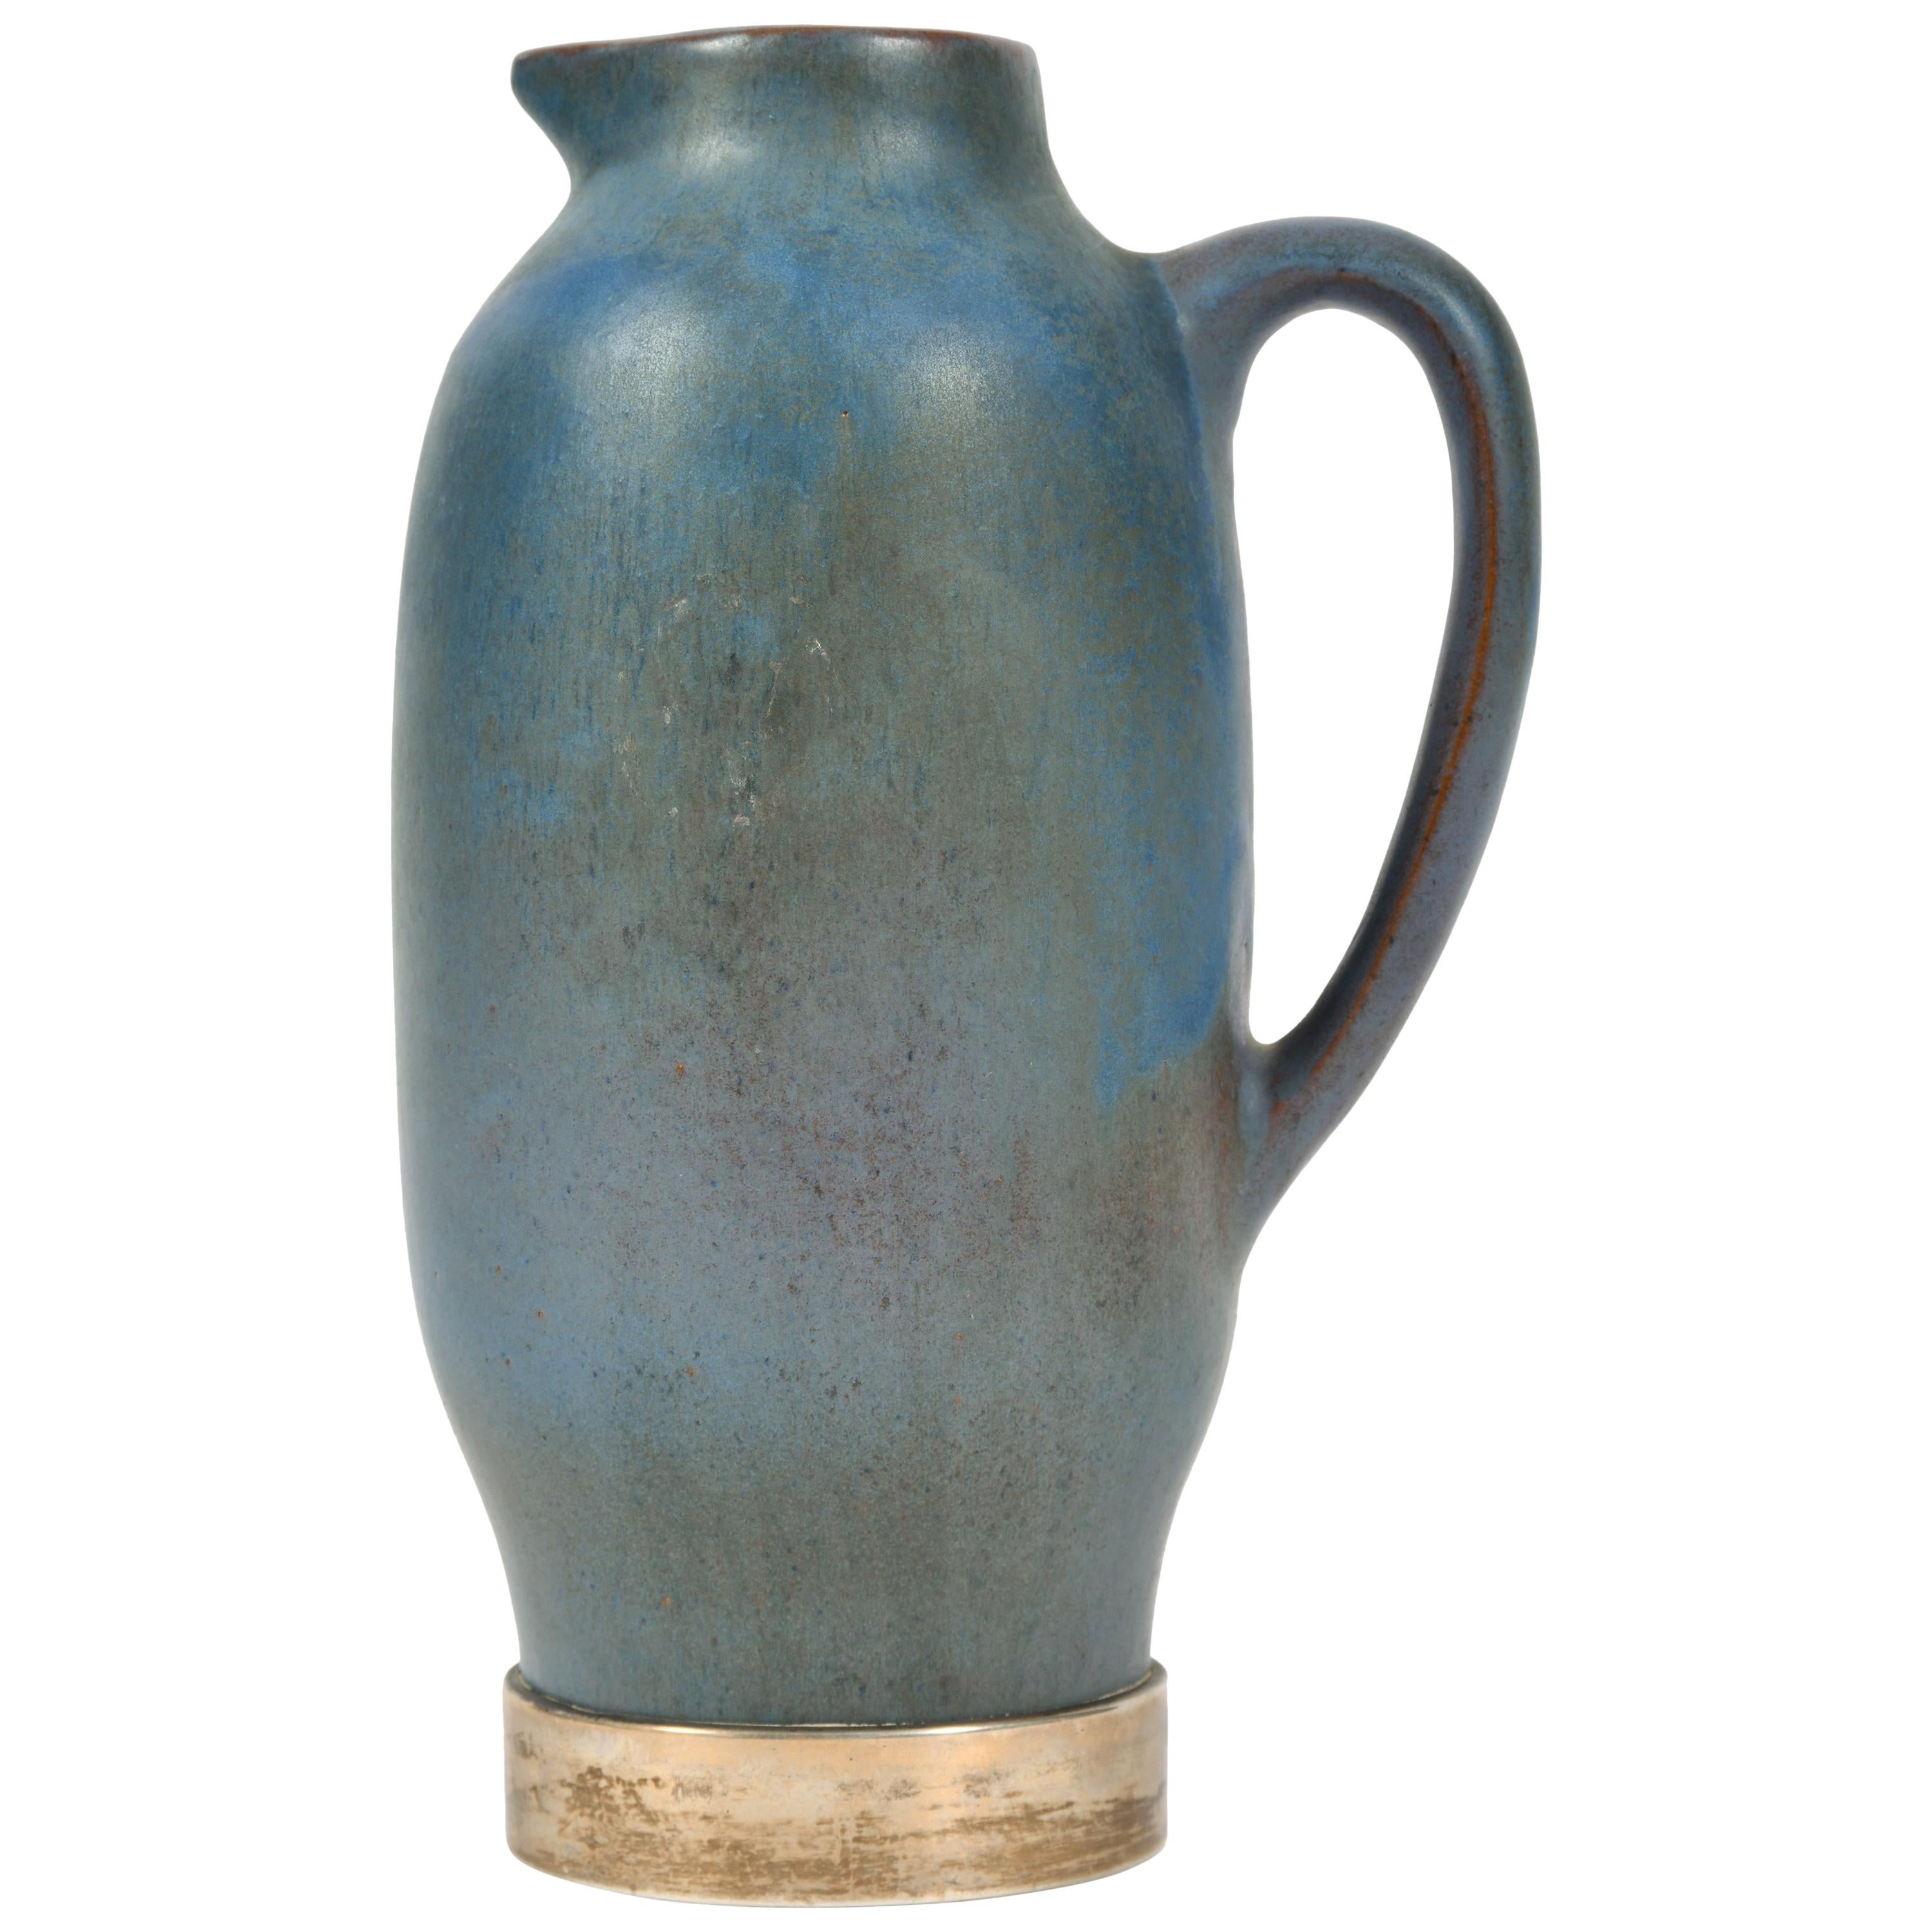 1950s Silver and Blue Ceramic Jug, Spain